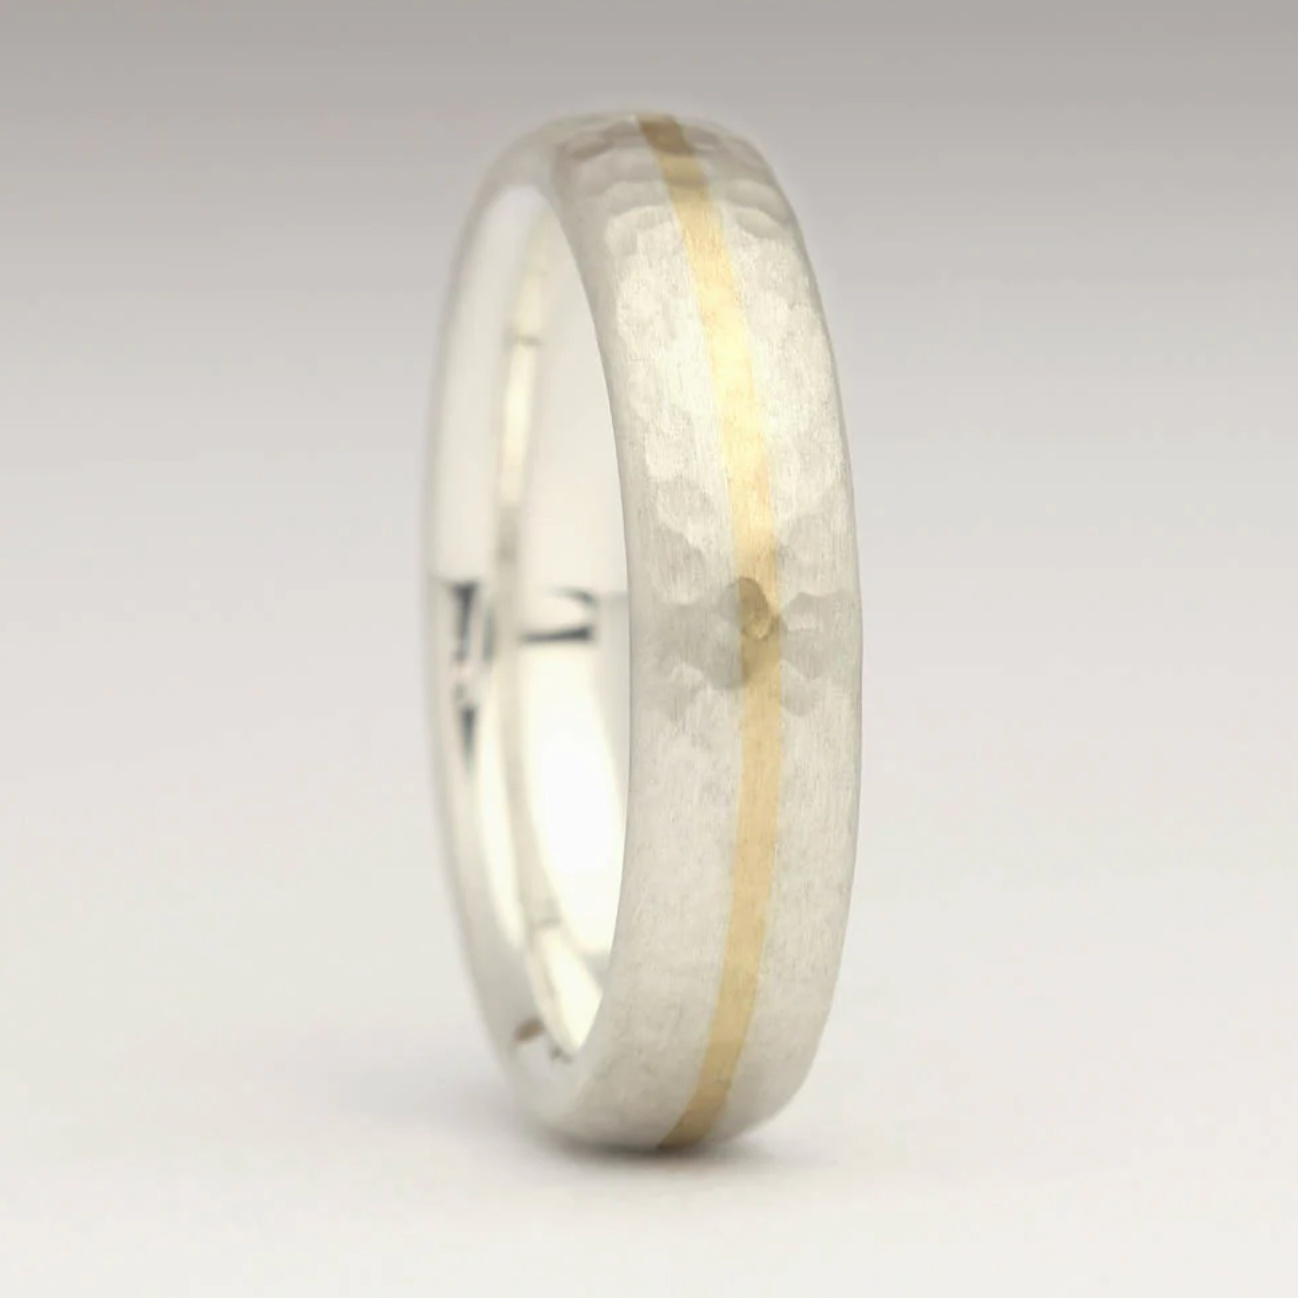 Silver and Gold Inlay Ring